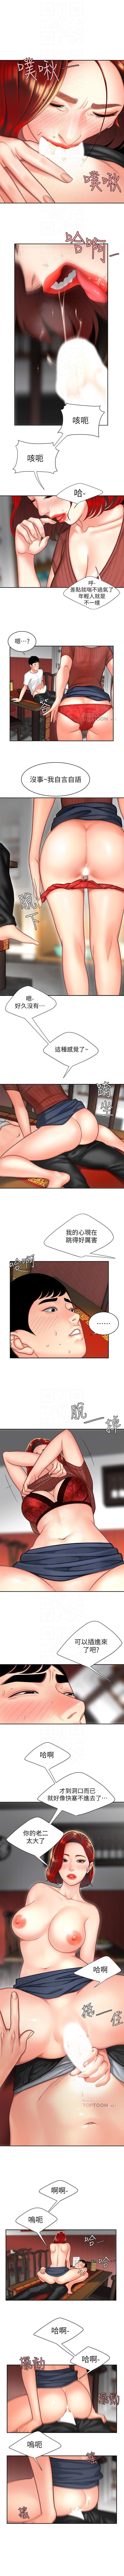 DELIVERY MAN | 幸福外卖员 Ch. 2 4